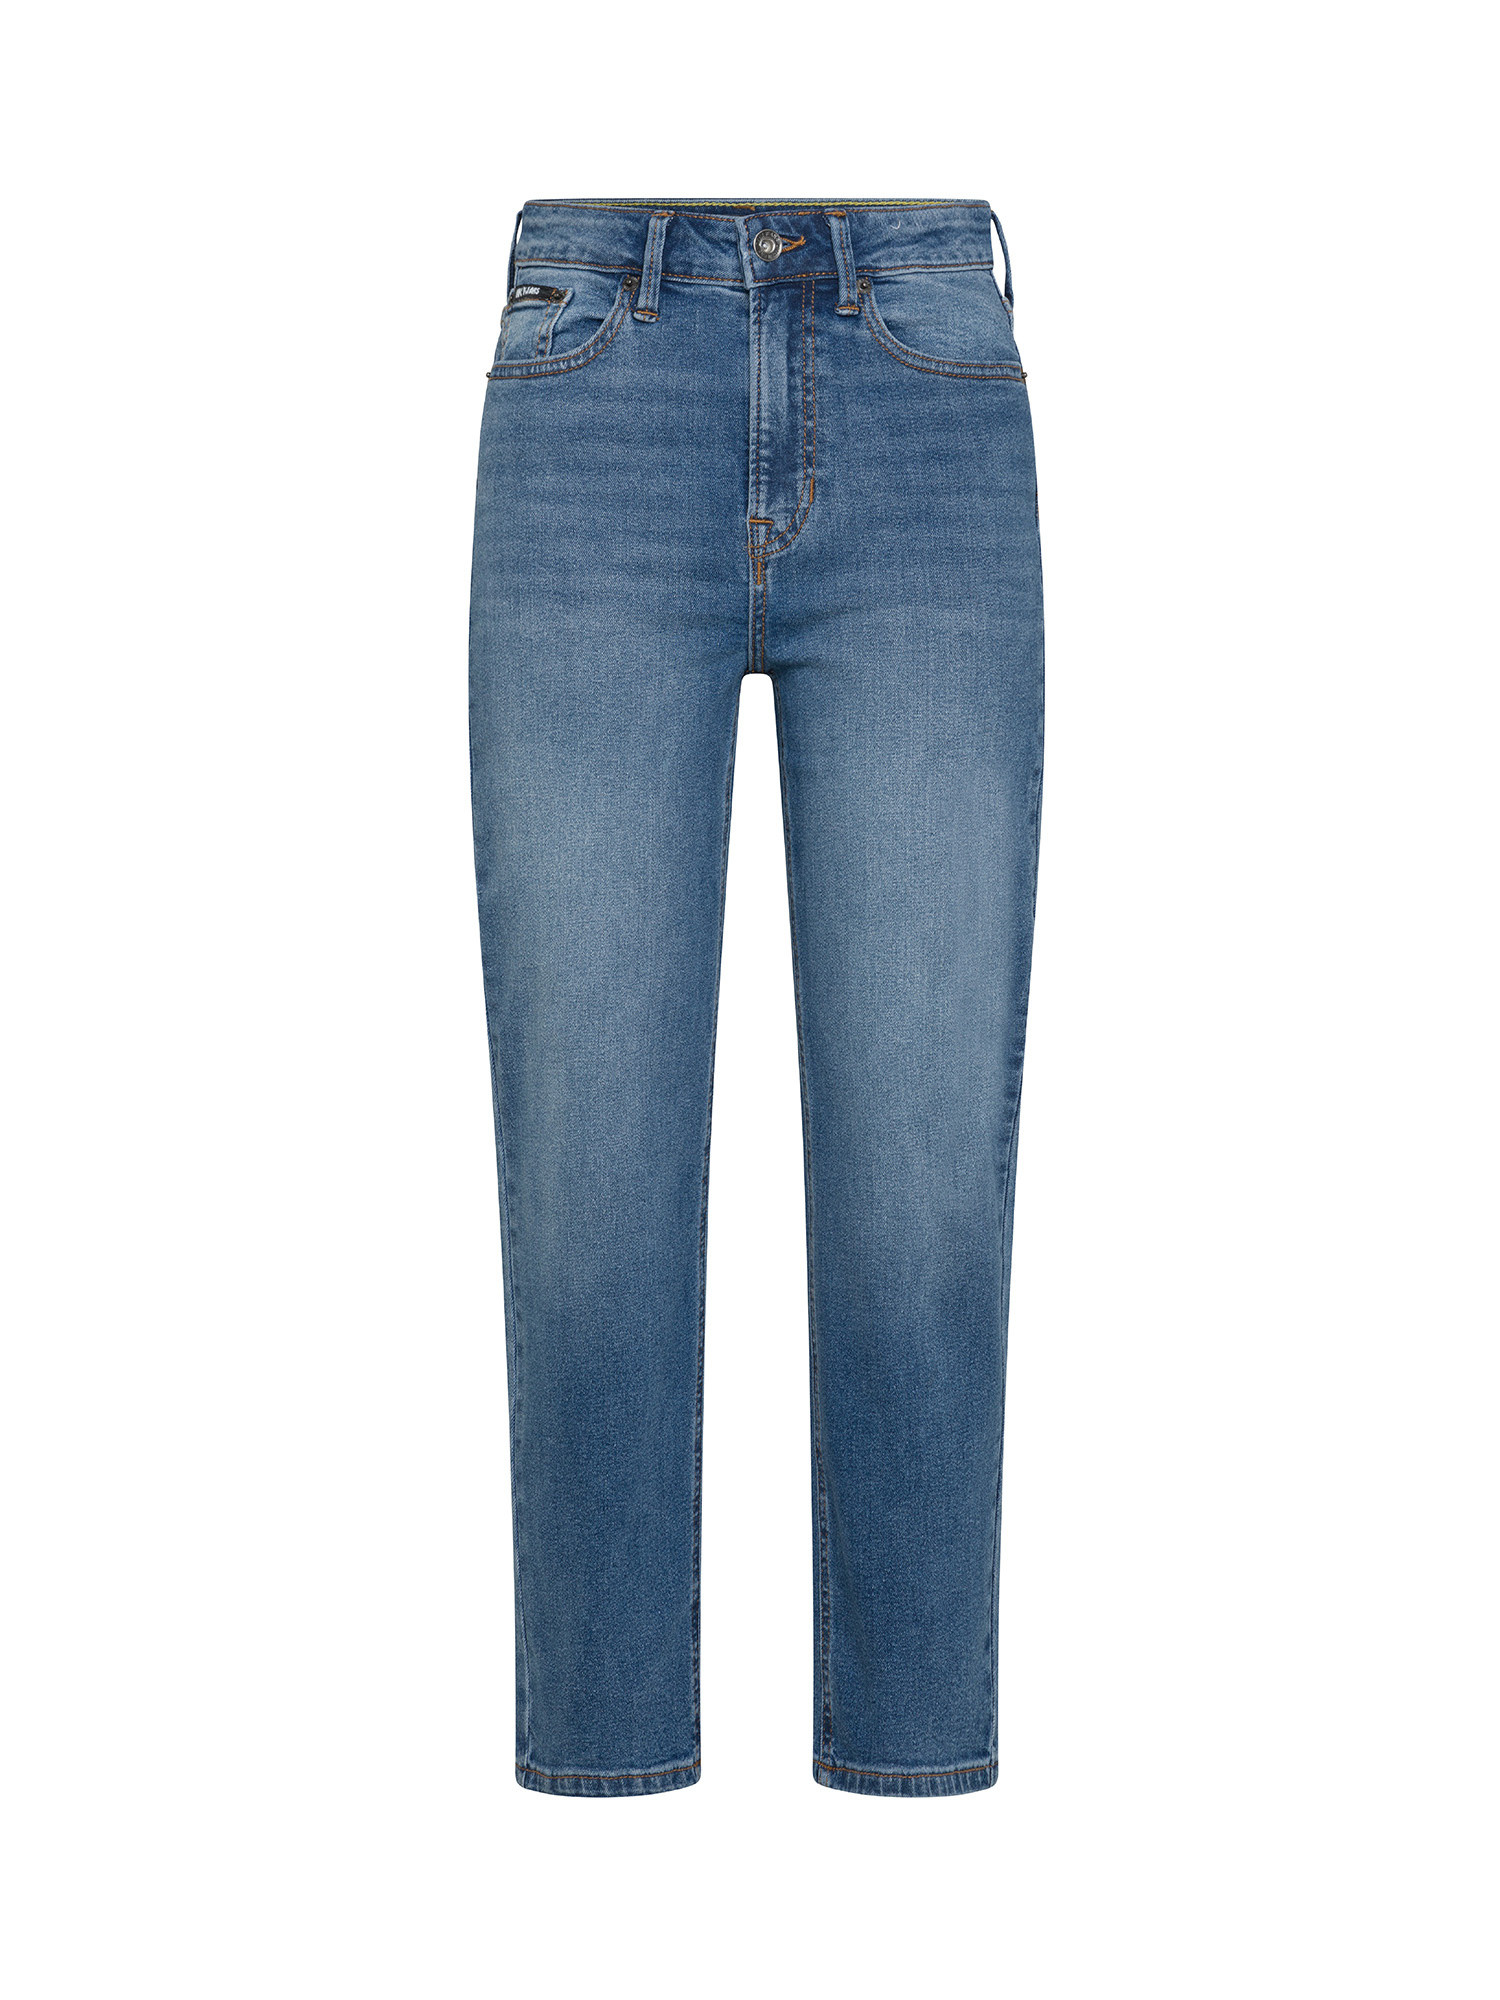 DKNY - Straight cut, slightly cropped high-waisted jeans, Denim, large image number 0